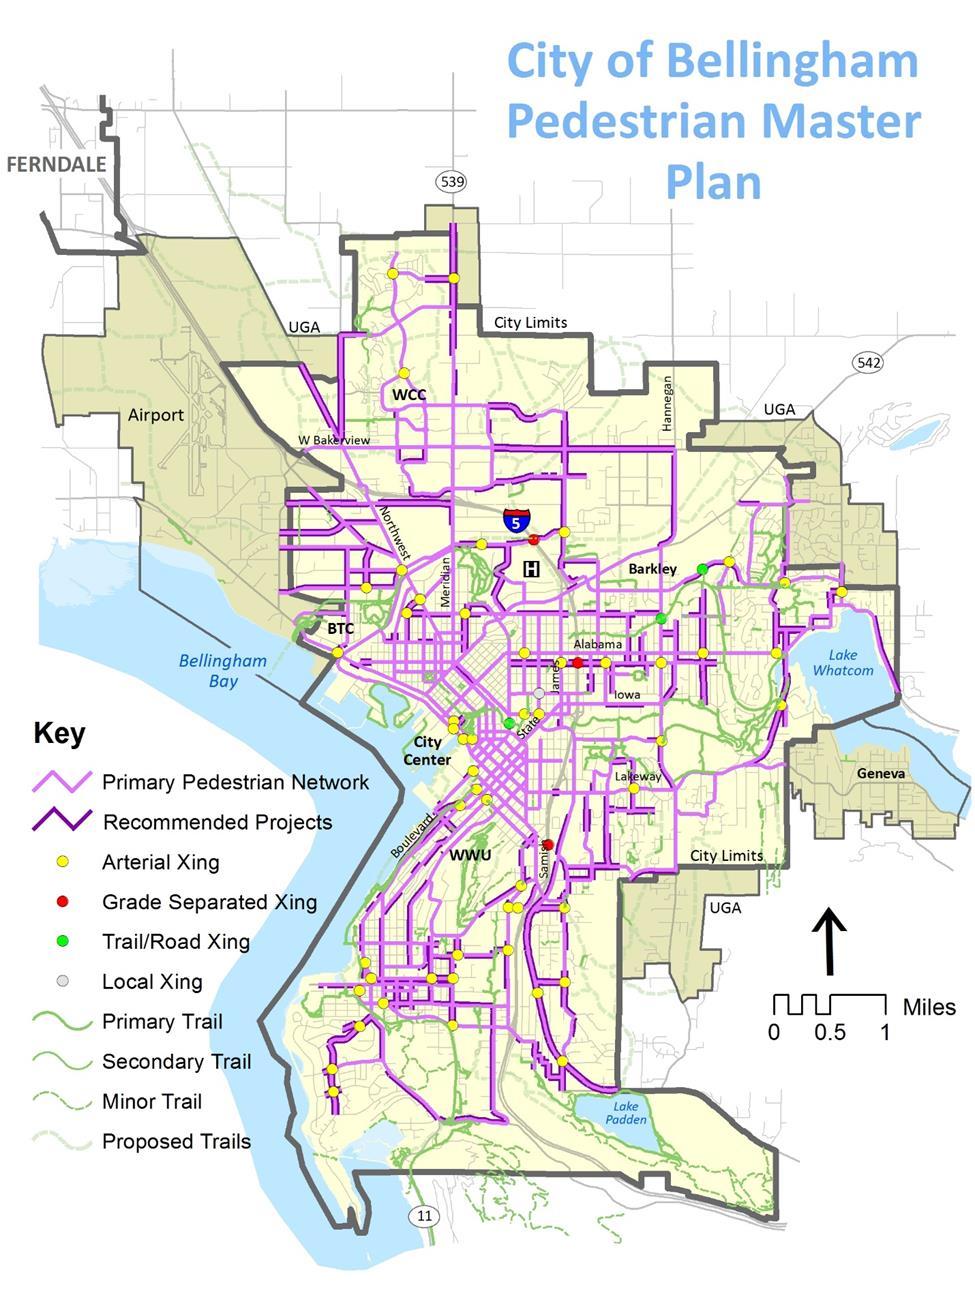 Approved August 2012 (Adopted PMP into Comprehensive Plan November 2016) In 8 years (2013-2020) City Council approved construction and funding in 6-Year TIP* for: 43 PMP sidewalk network links 31 PMP